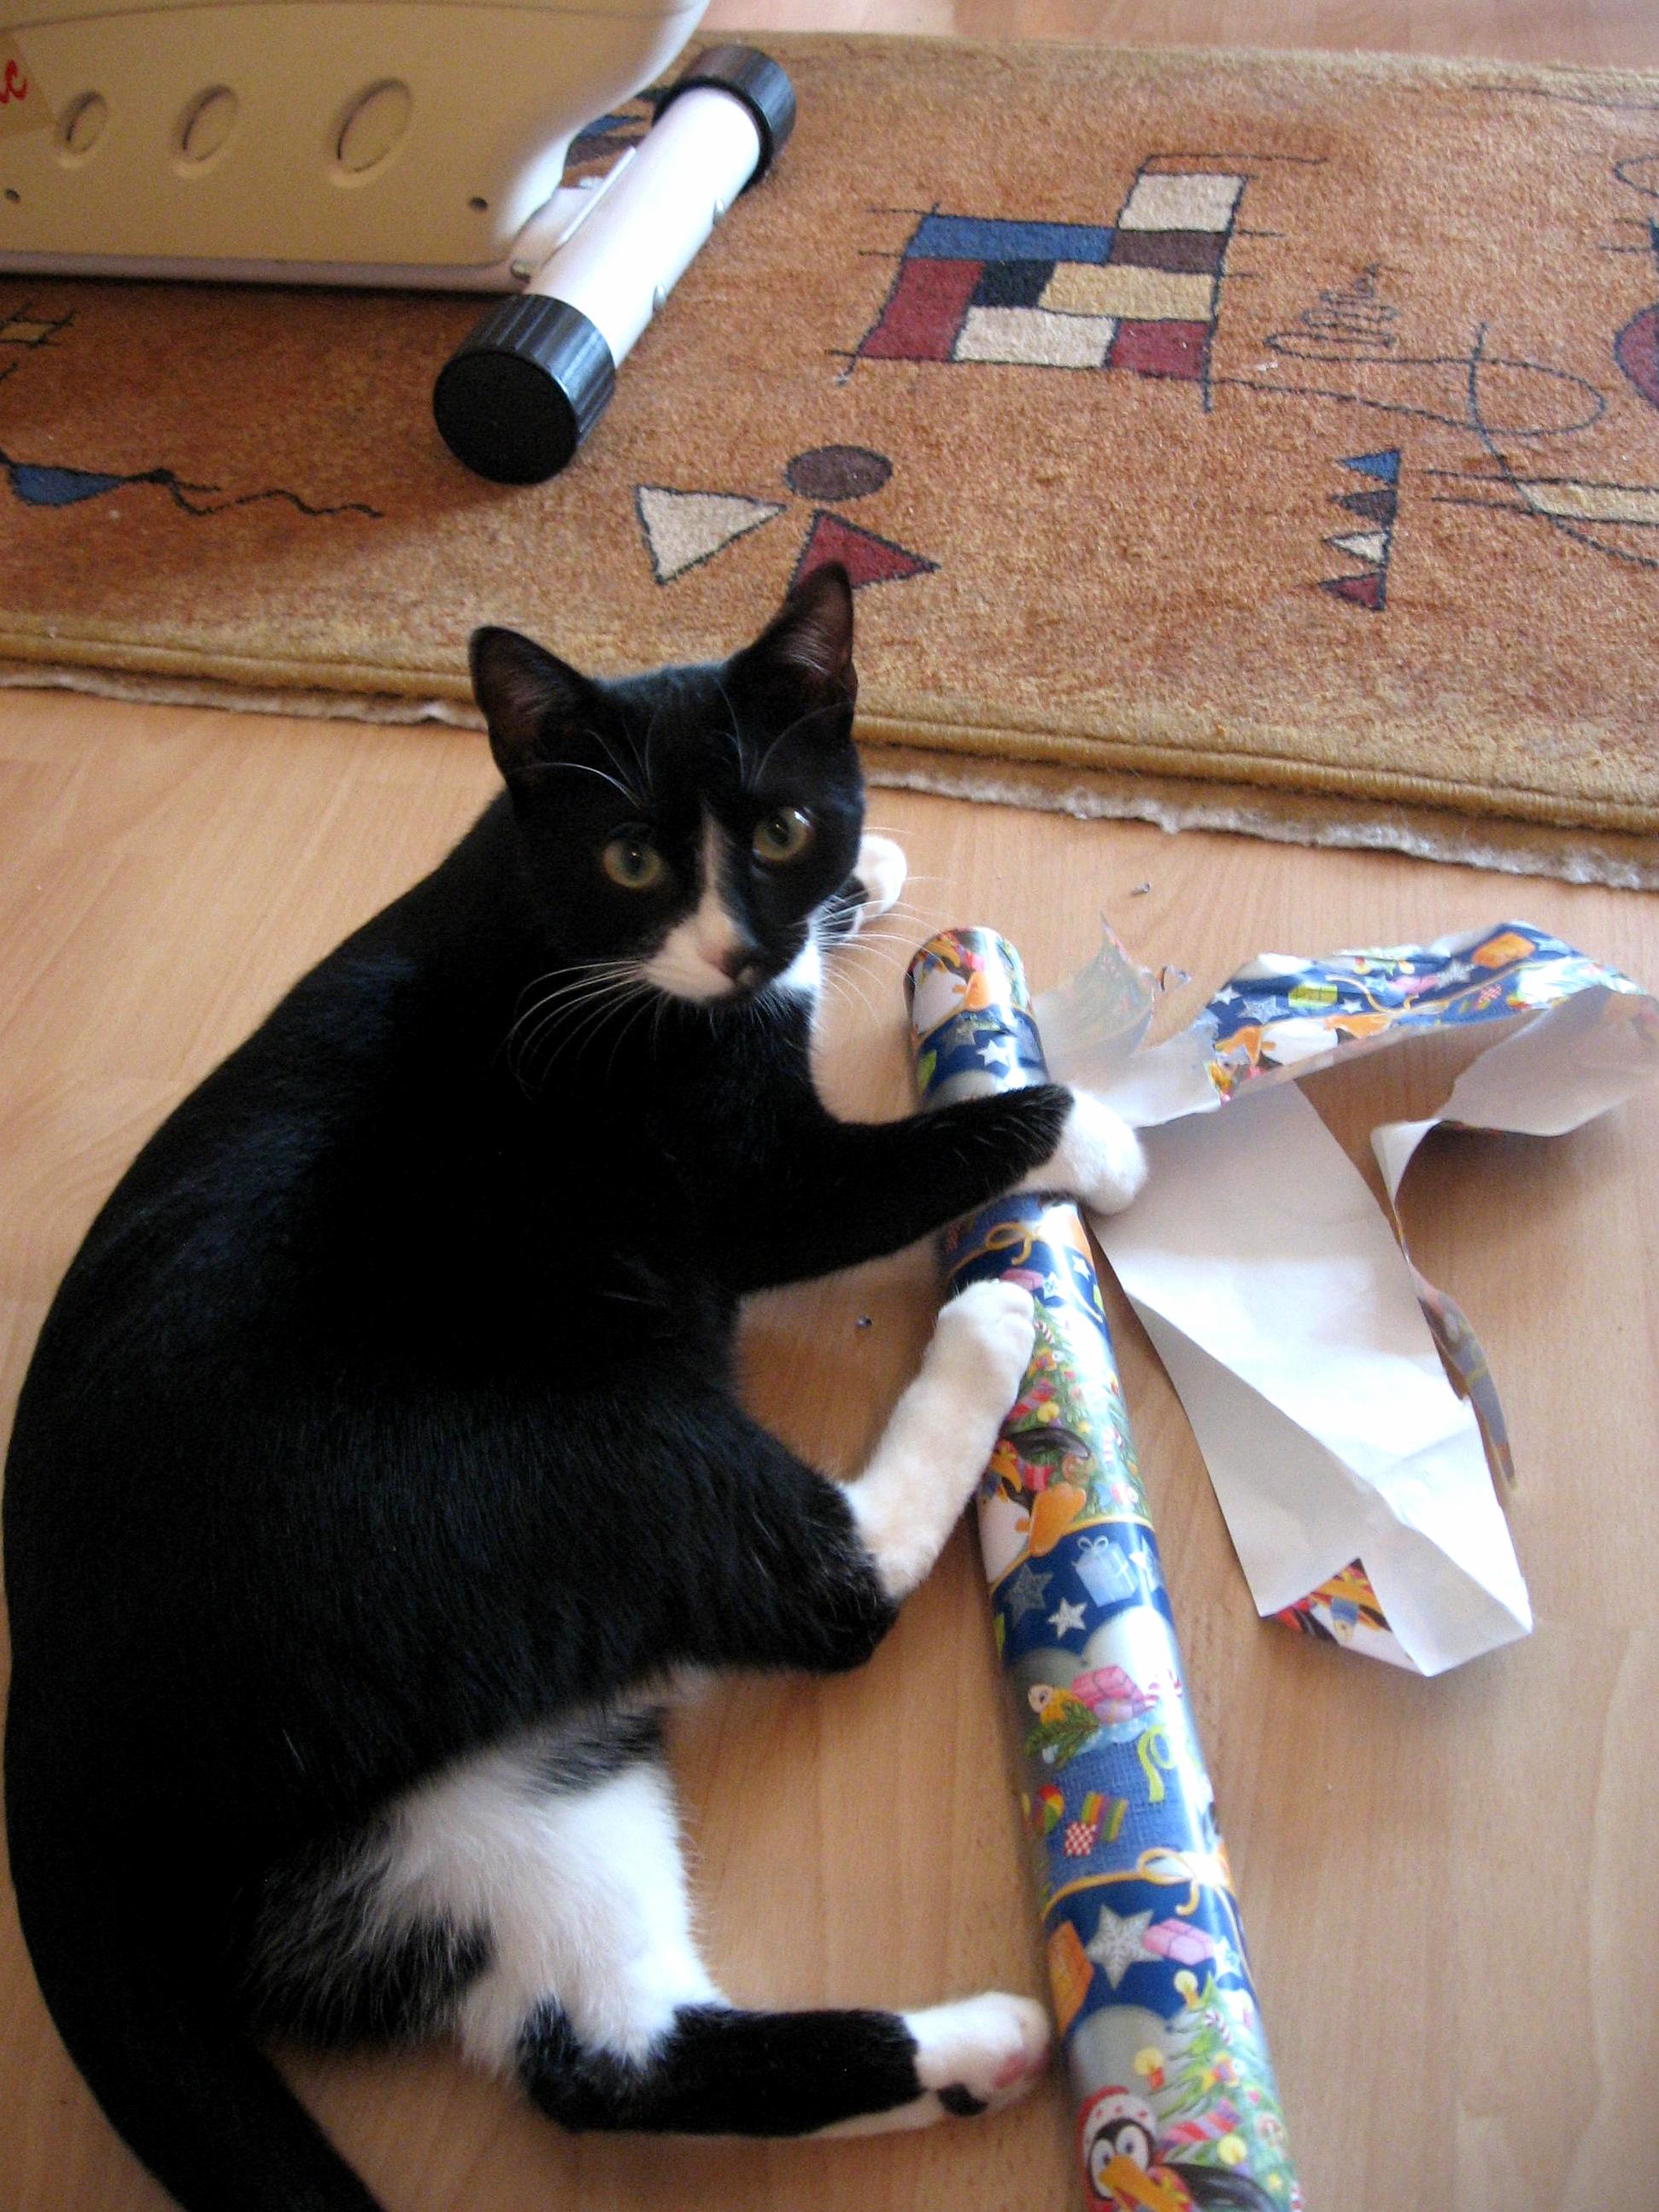 She did her best to help wrapping gifts